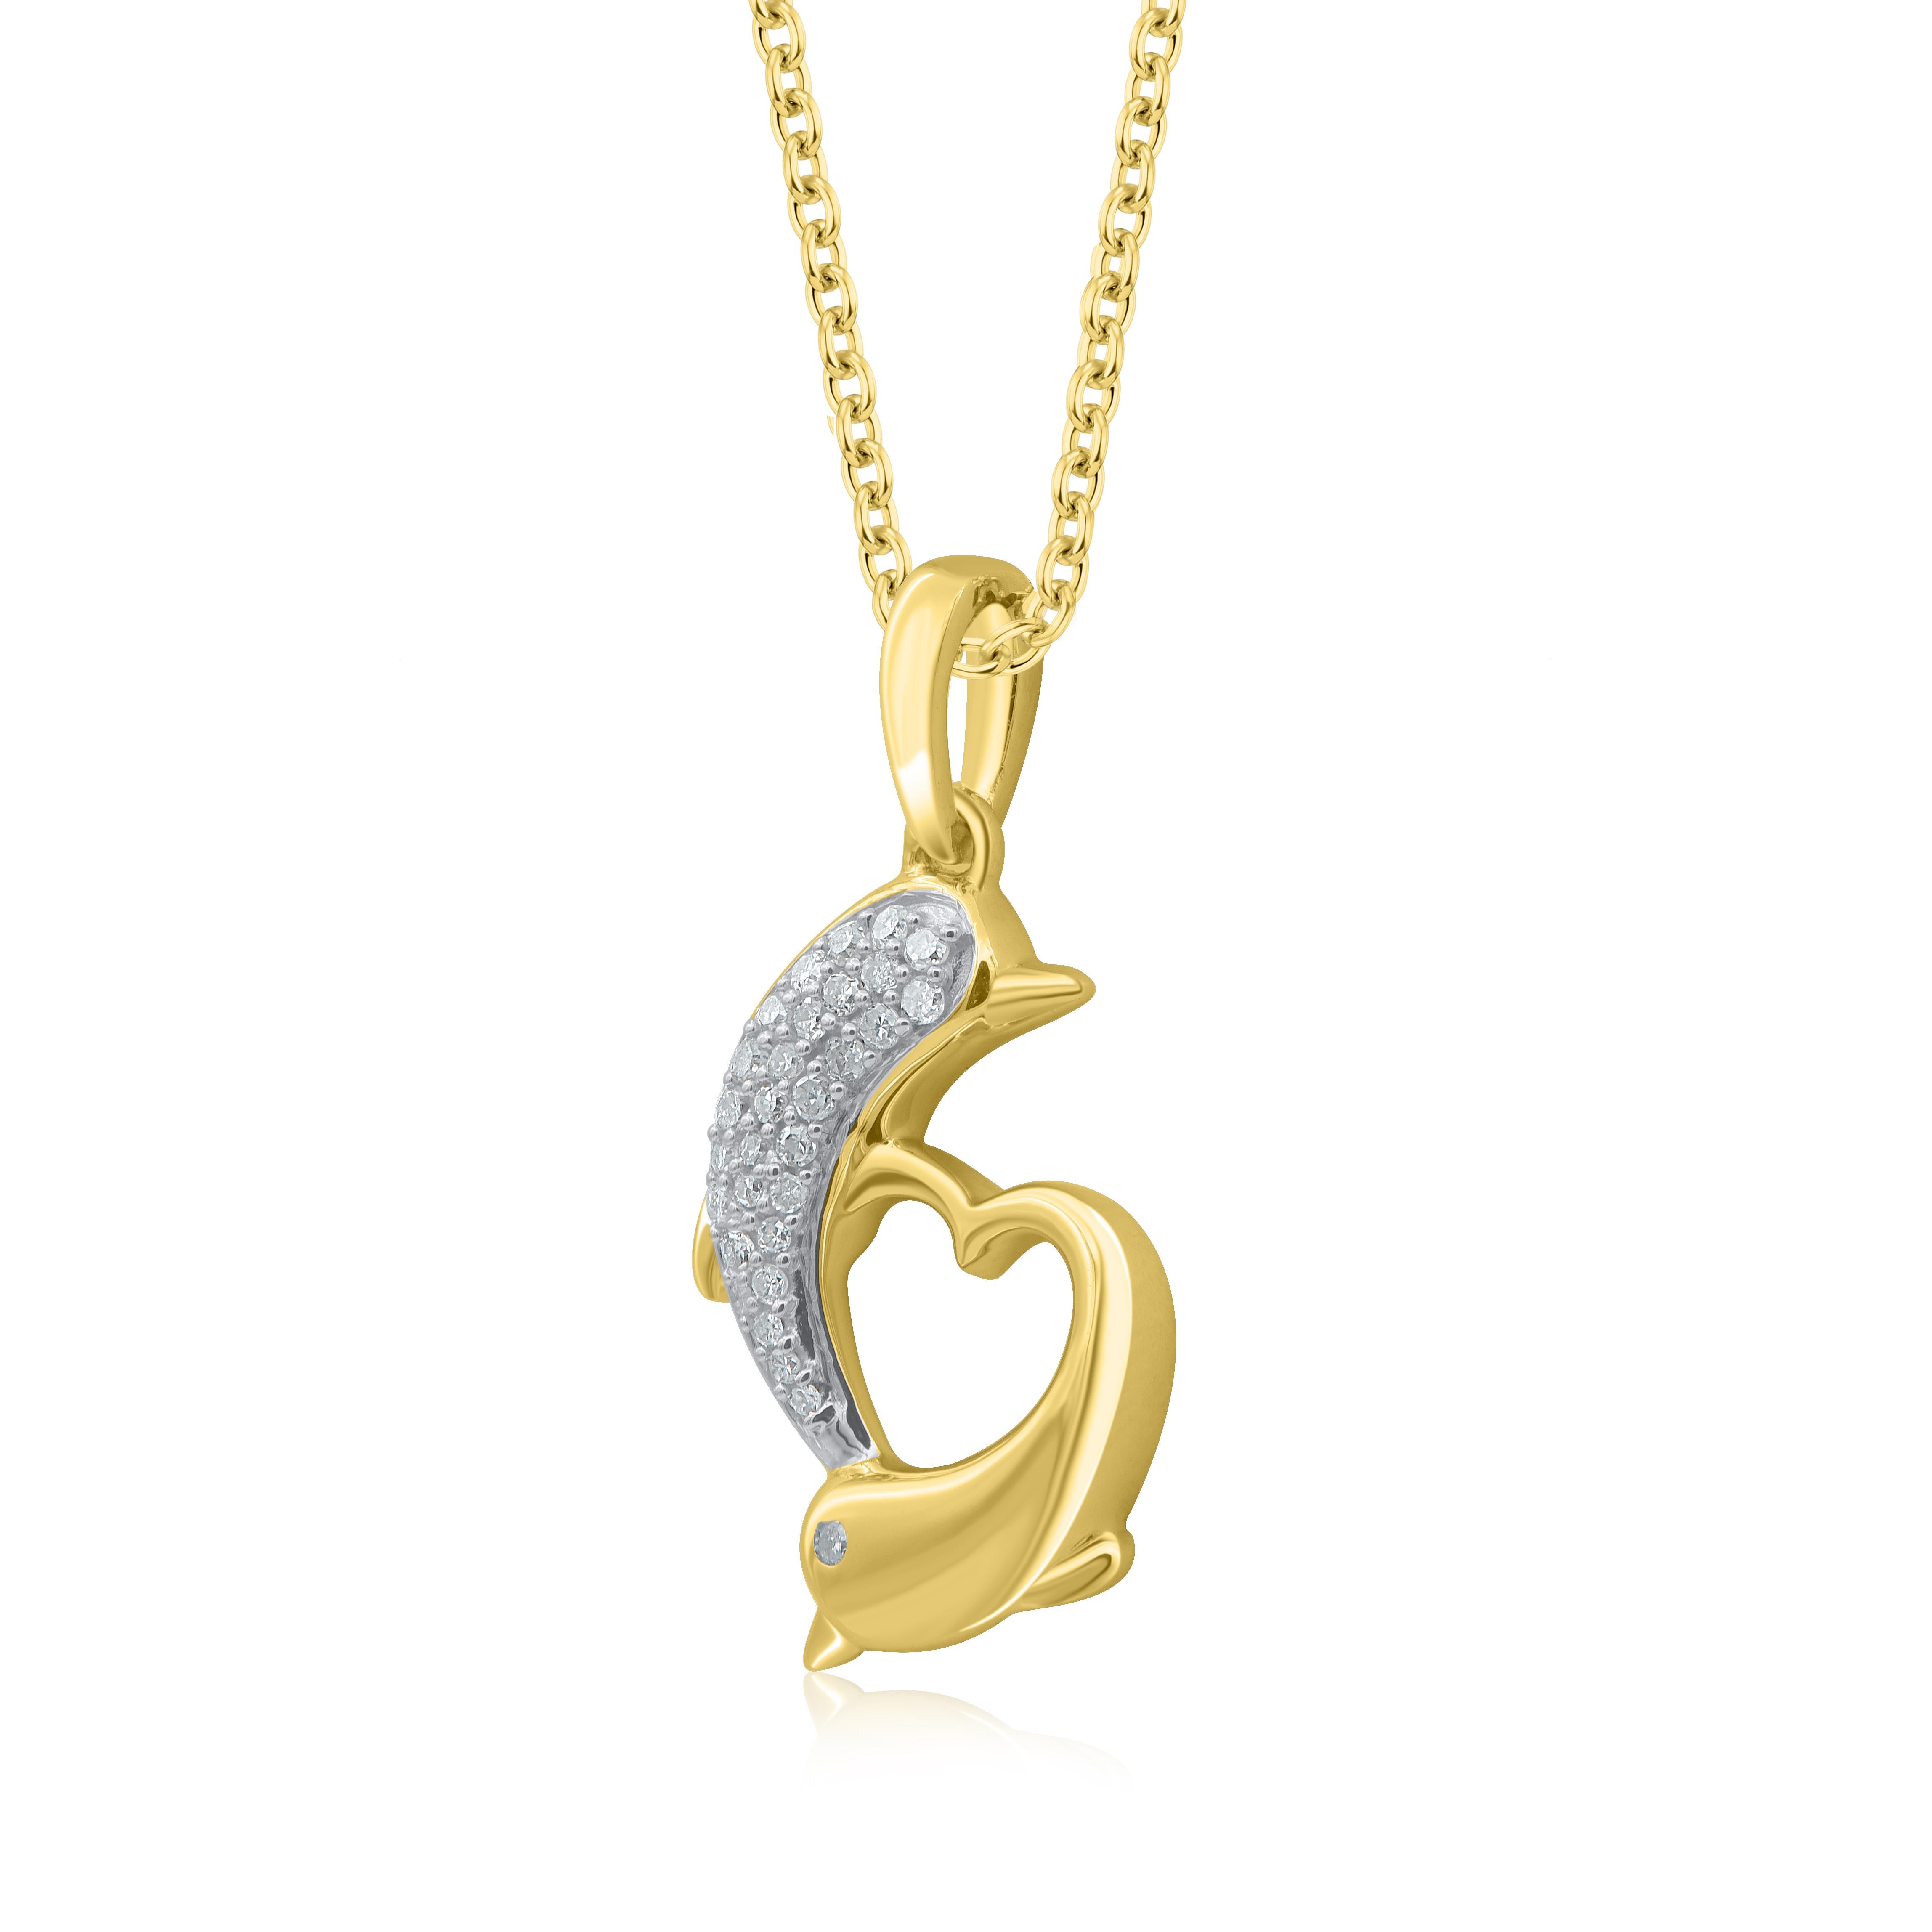 A striking addition when worn on its own, this diamond pendant makes a stunning impression. This dolphin pendant is crafted from 14-karat yellow gold and features 30 single cut diamonds set in pave & flush setting. H-I color I2 clarity and a high